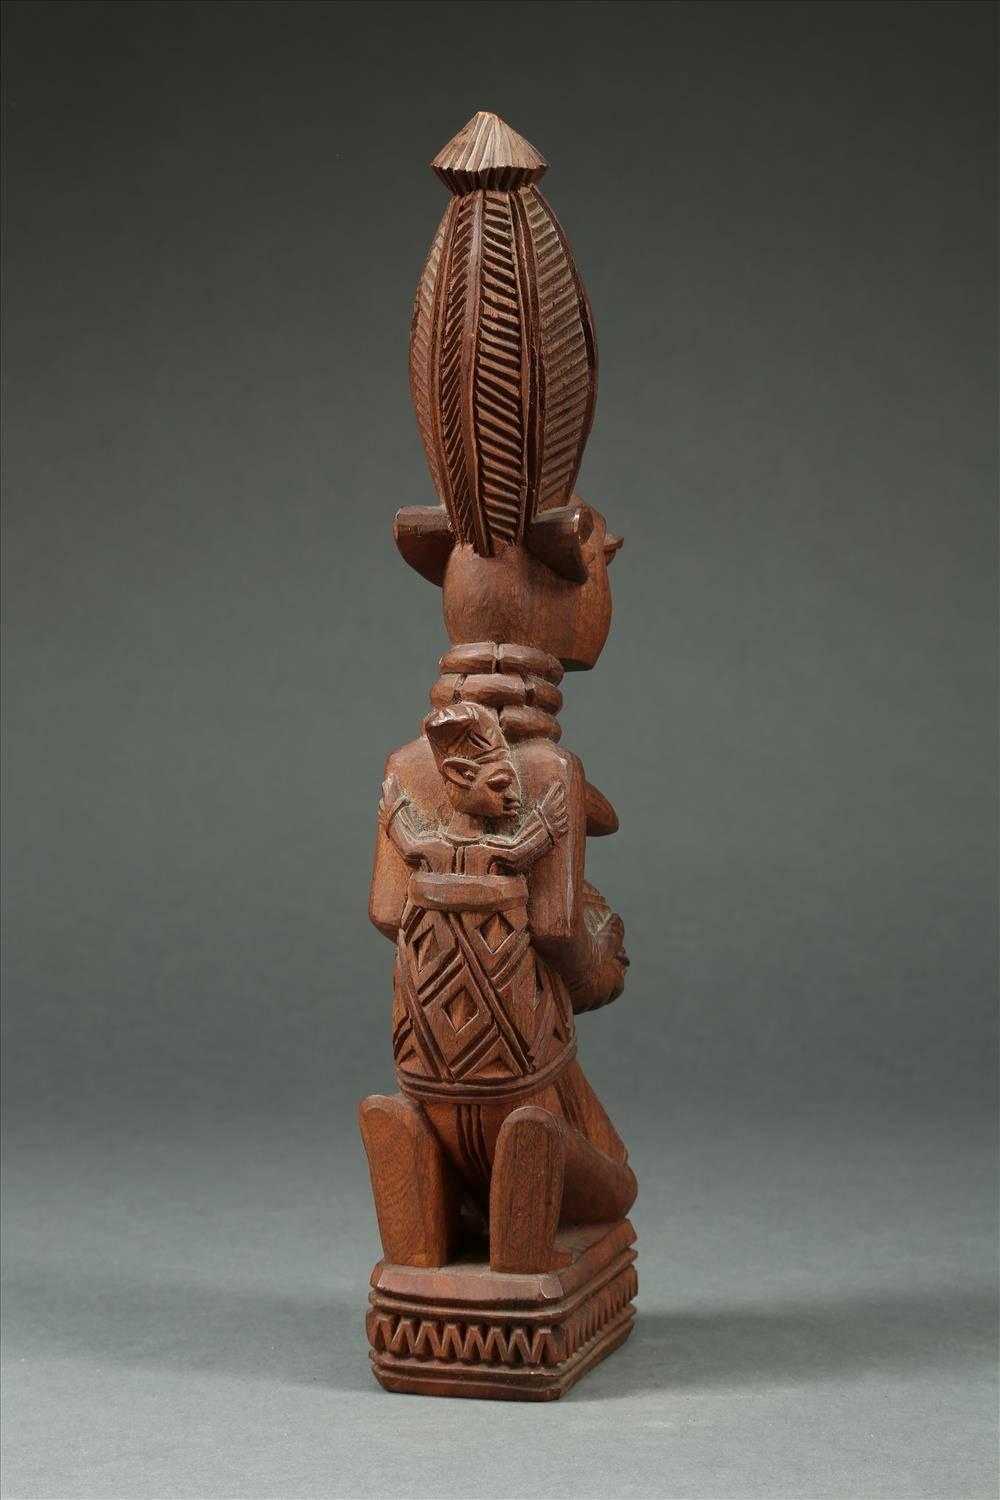 Offered by Scott McCue
Tribal Yoruba maternity figure holding a bowl, Signed J.A. Fakeye, Nigeria

A kneeling Female Yoruba figure with tall hairstyle and child in wrap on back reaching around mother. Signed on base J.A. Fakeye. 15 3/8